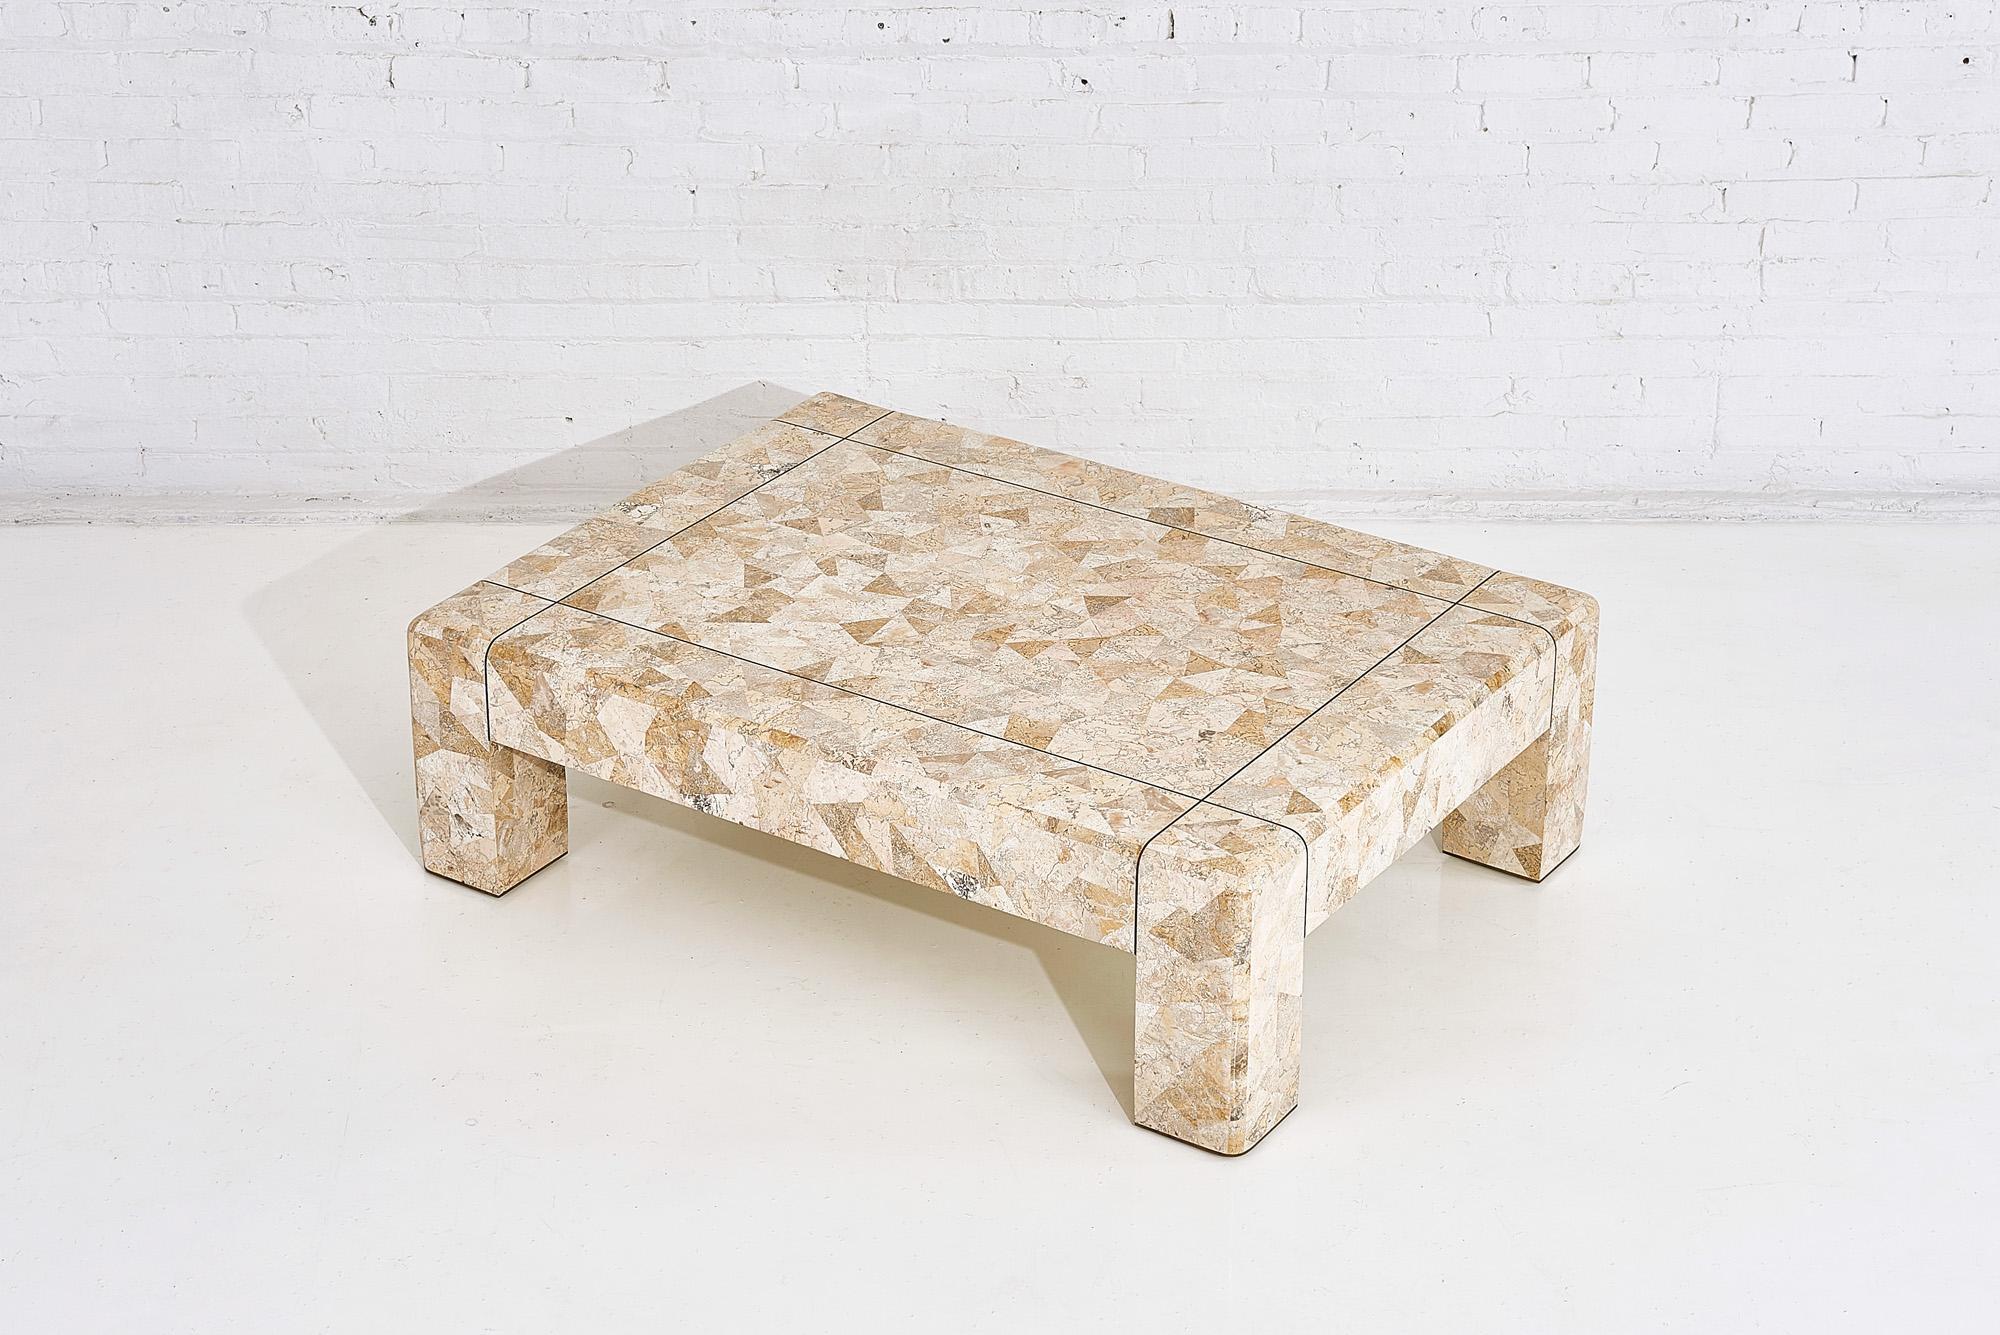 Karl Springer brass and tessellated travertine coffee table, circa 1970s.